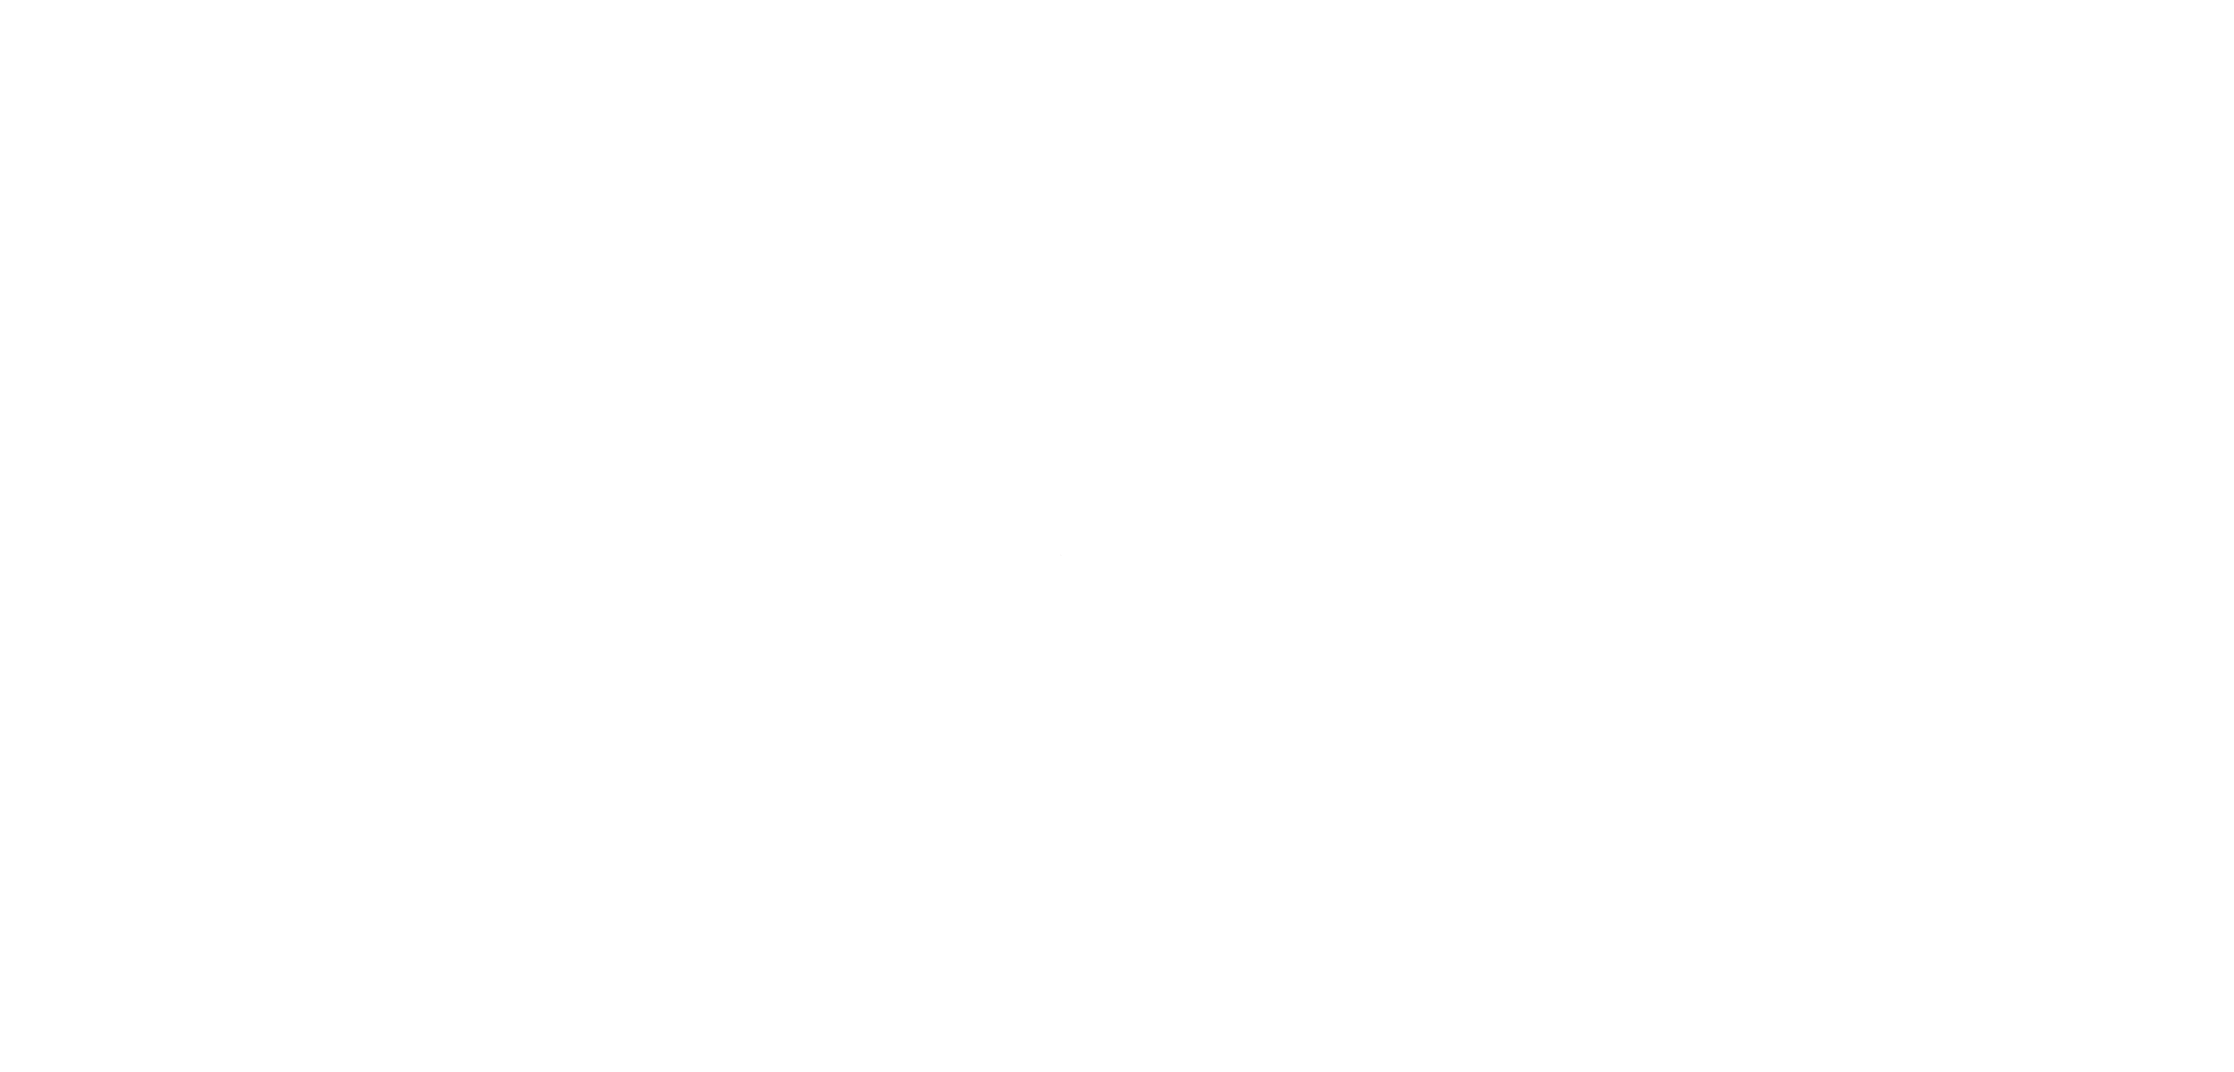 Red Envelope Investments